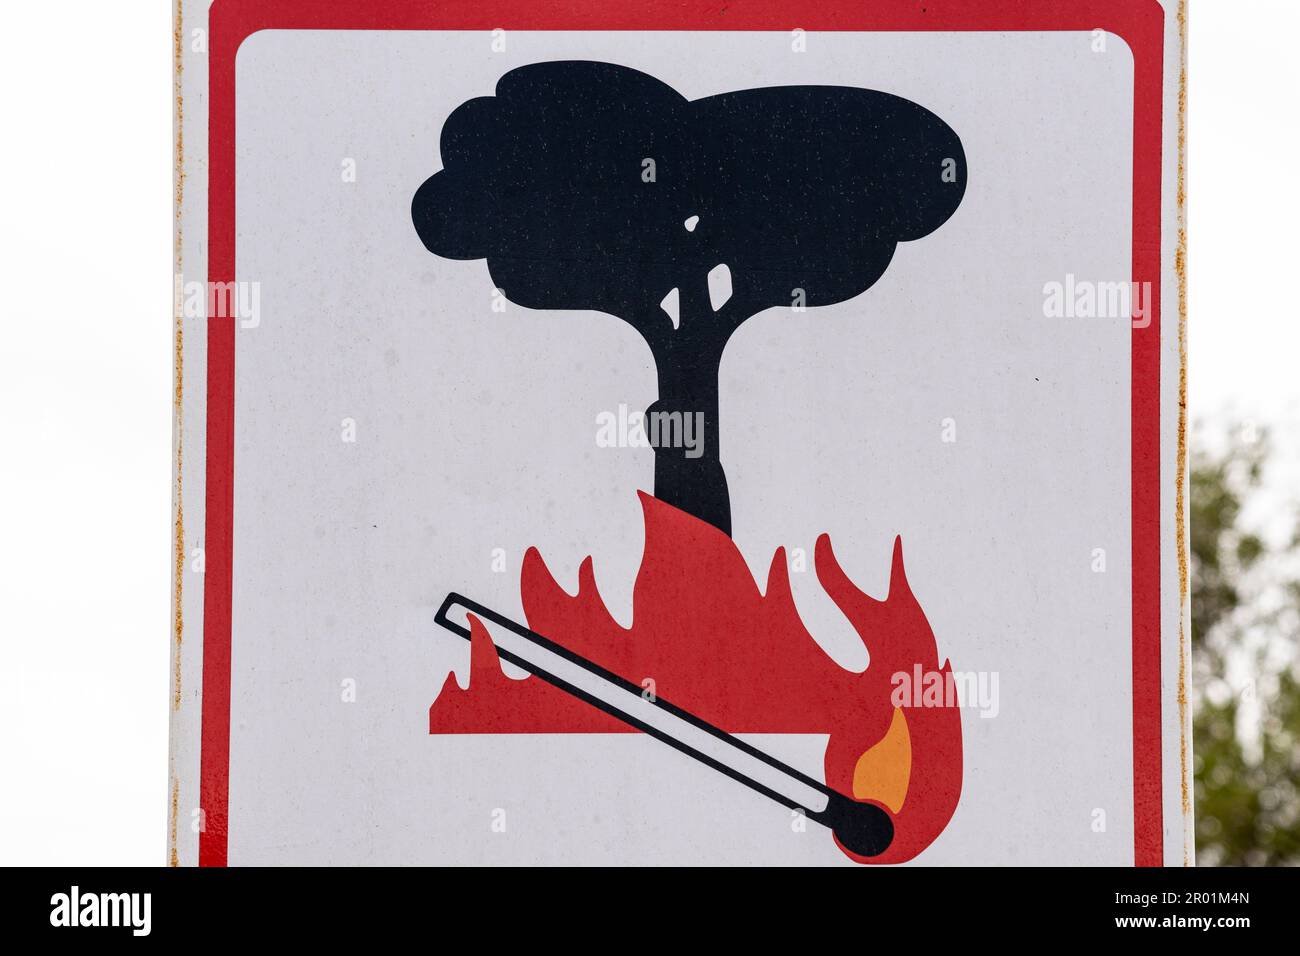 warning of maximum risk of forest fire, traffic sign, Majorca, Balearic Islands, Spain. Stock Photo